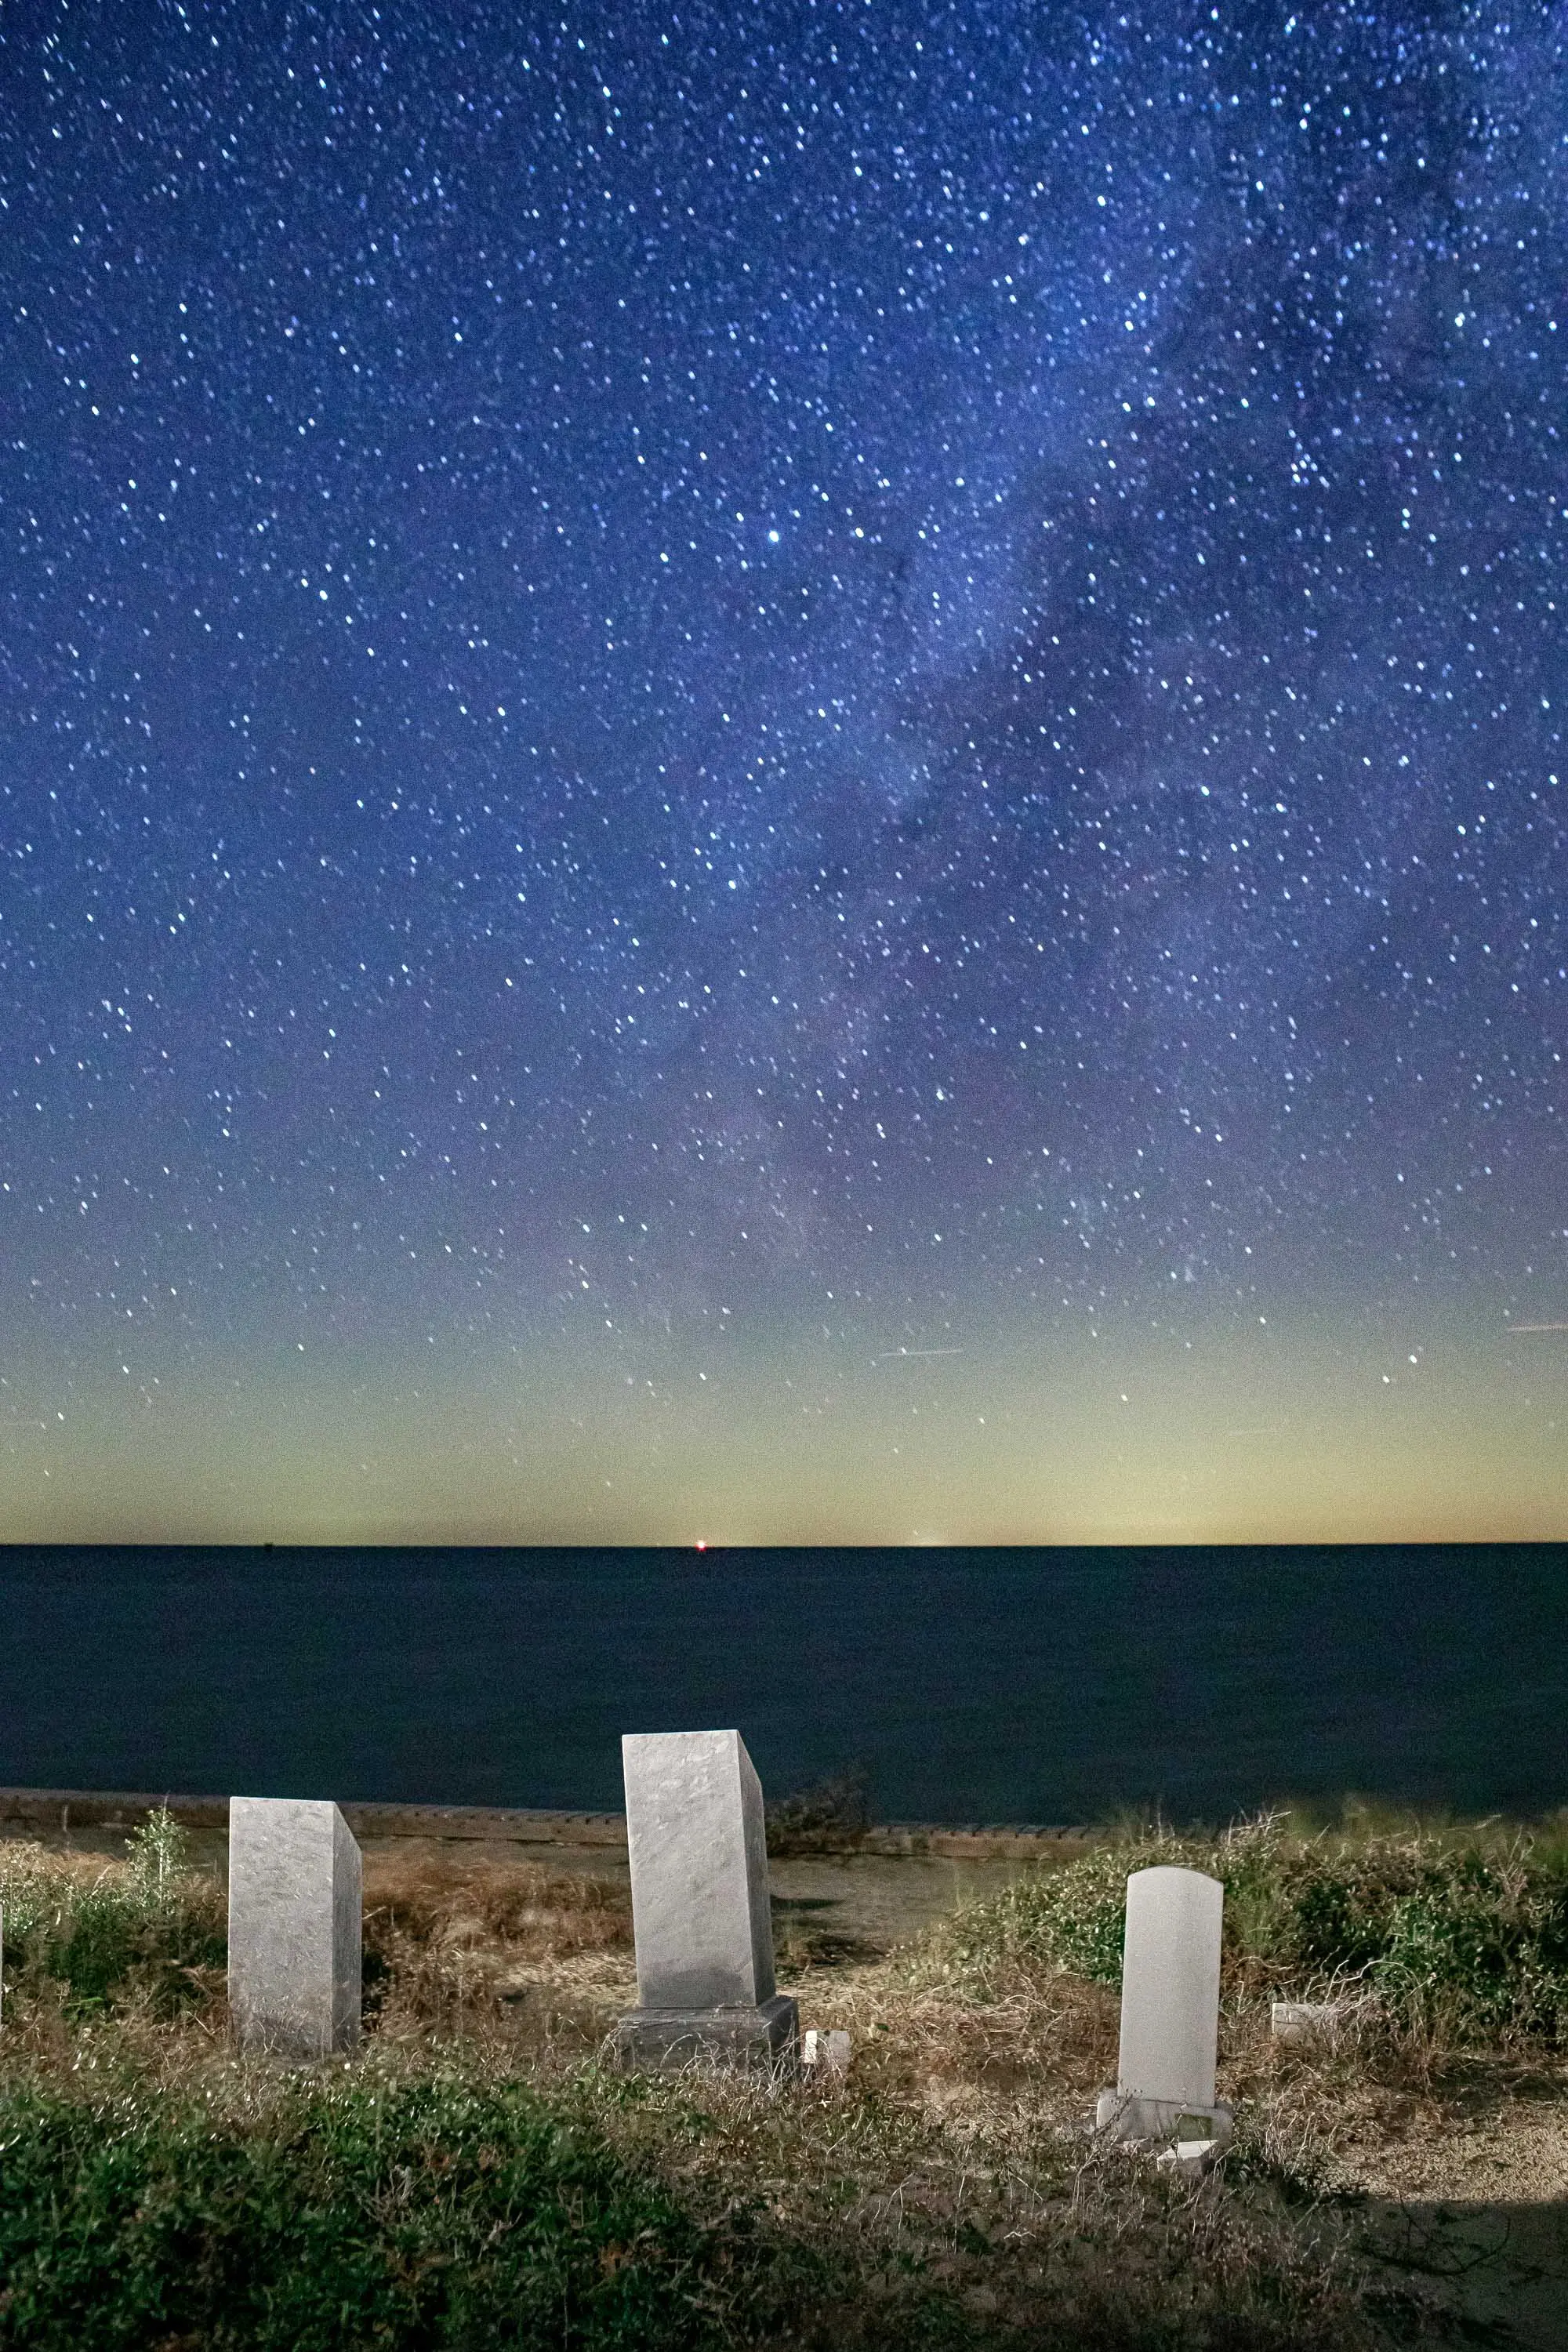 The Milky Way over the Pamlico Sound to the west of the cemetery on a new moon in November 2020.